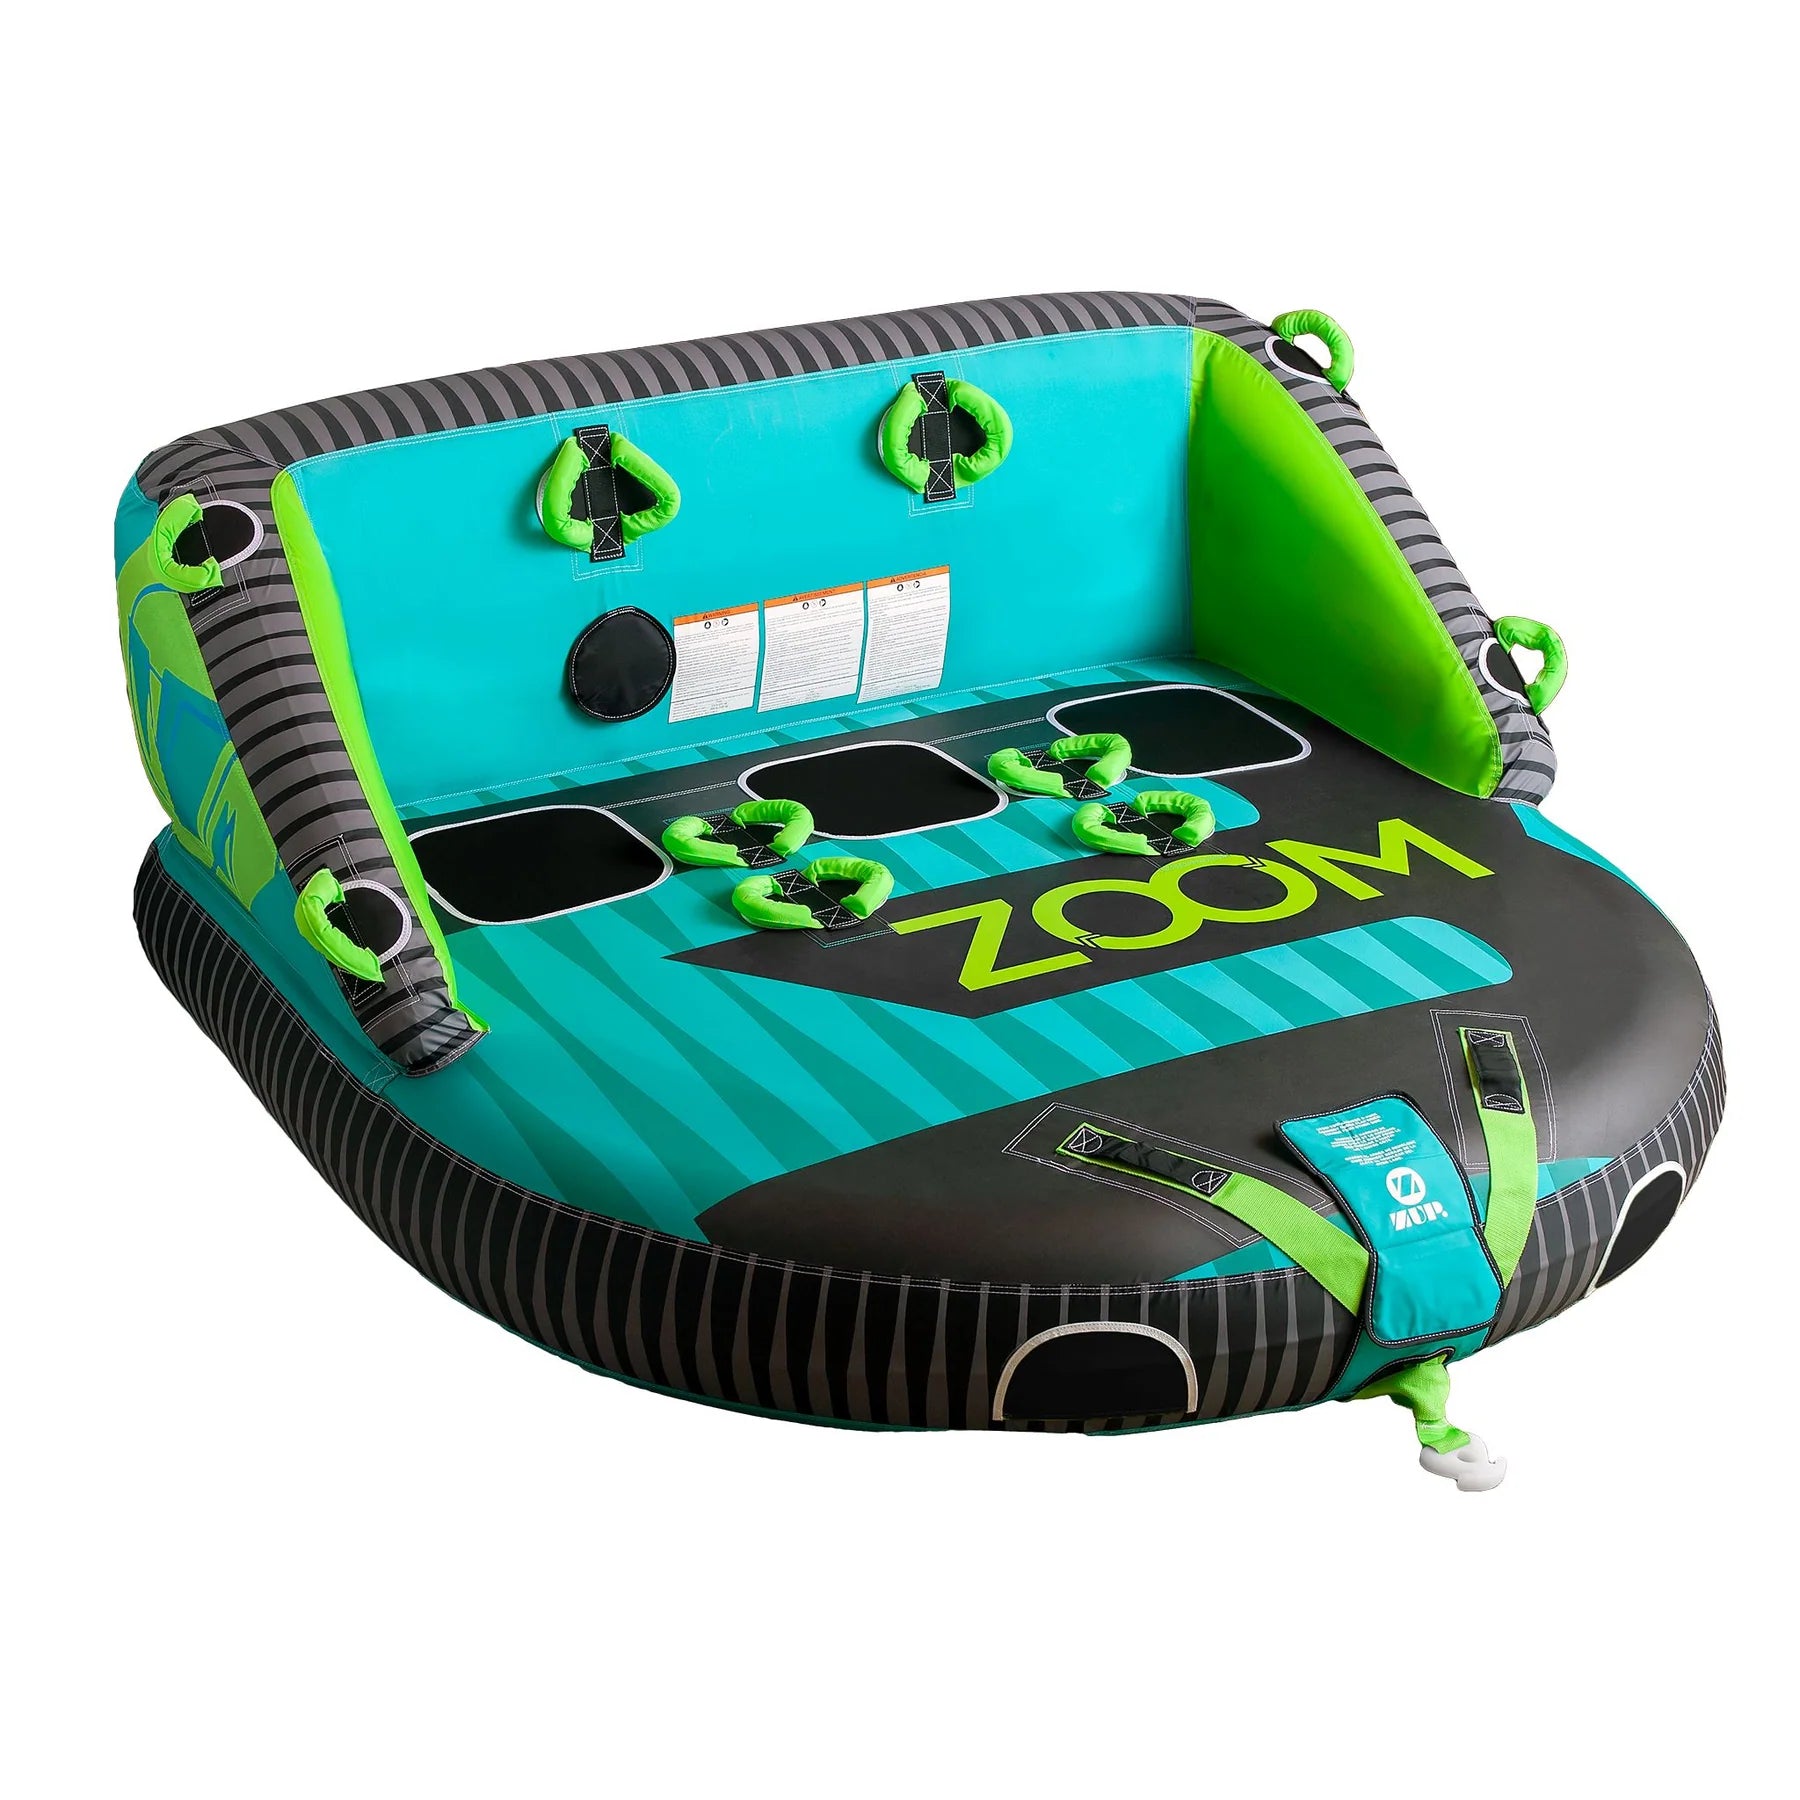 ZUP Zoom3 - Three Person Towable Boat Tube